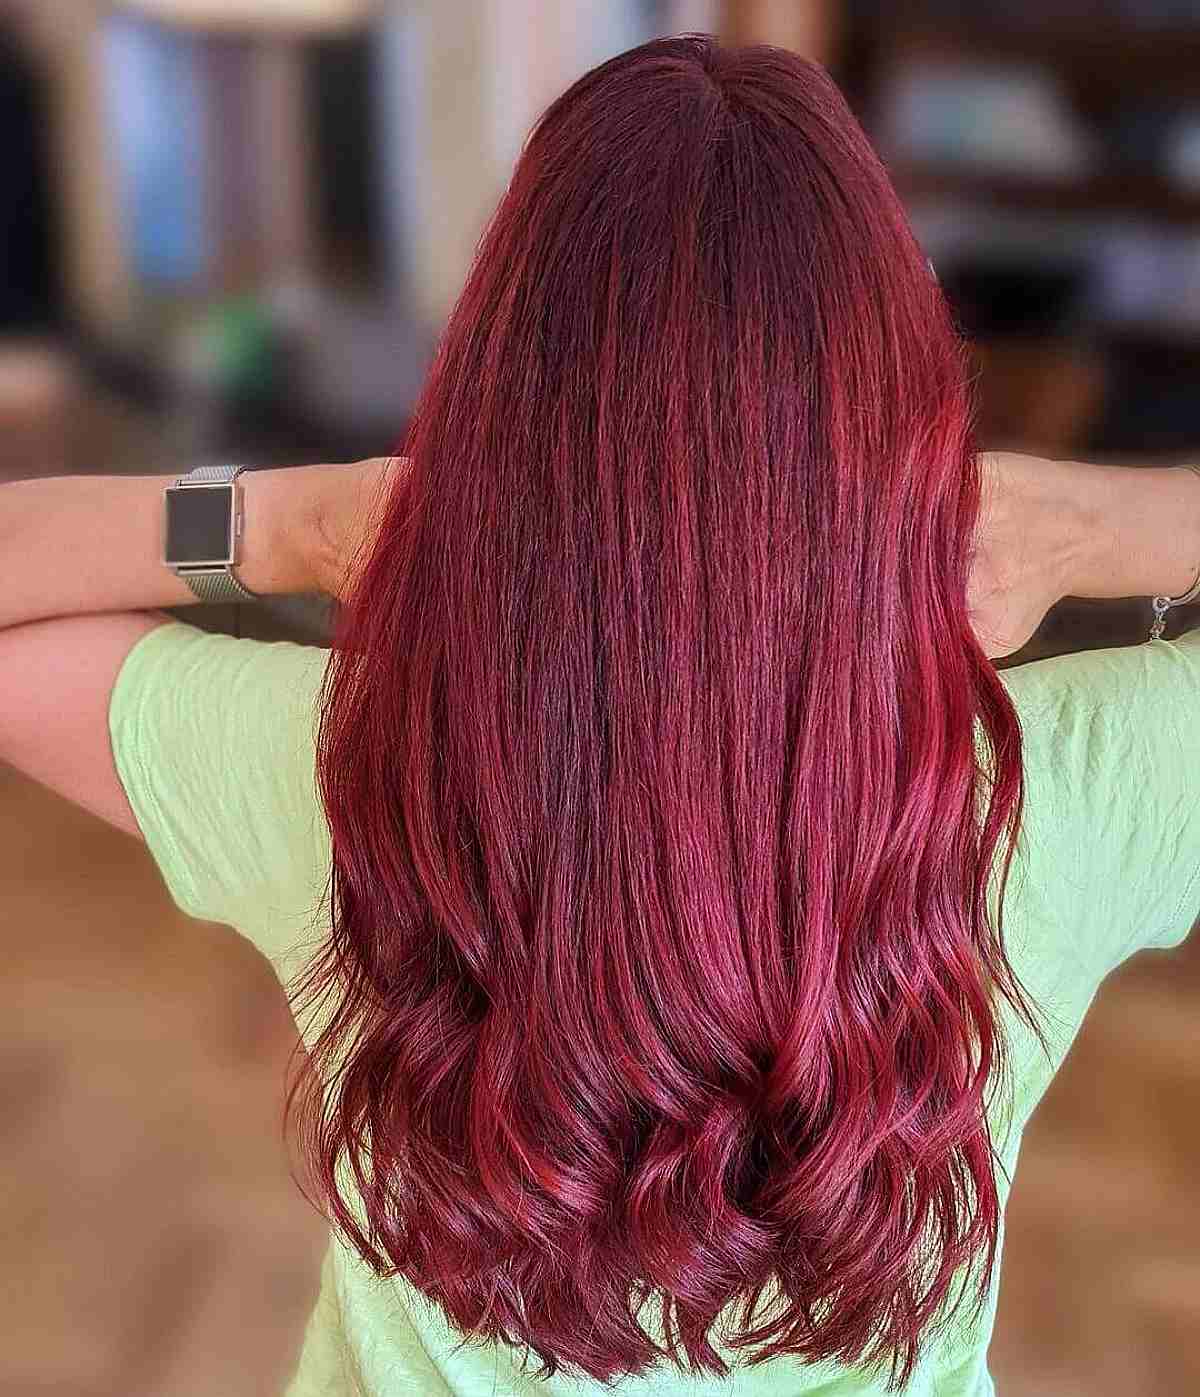 Stunning Long Red Hair with Curled Ends